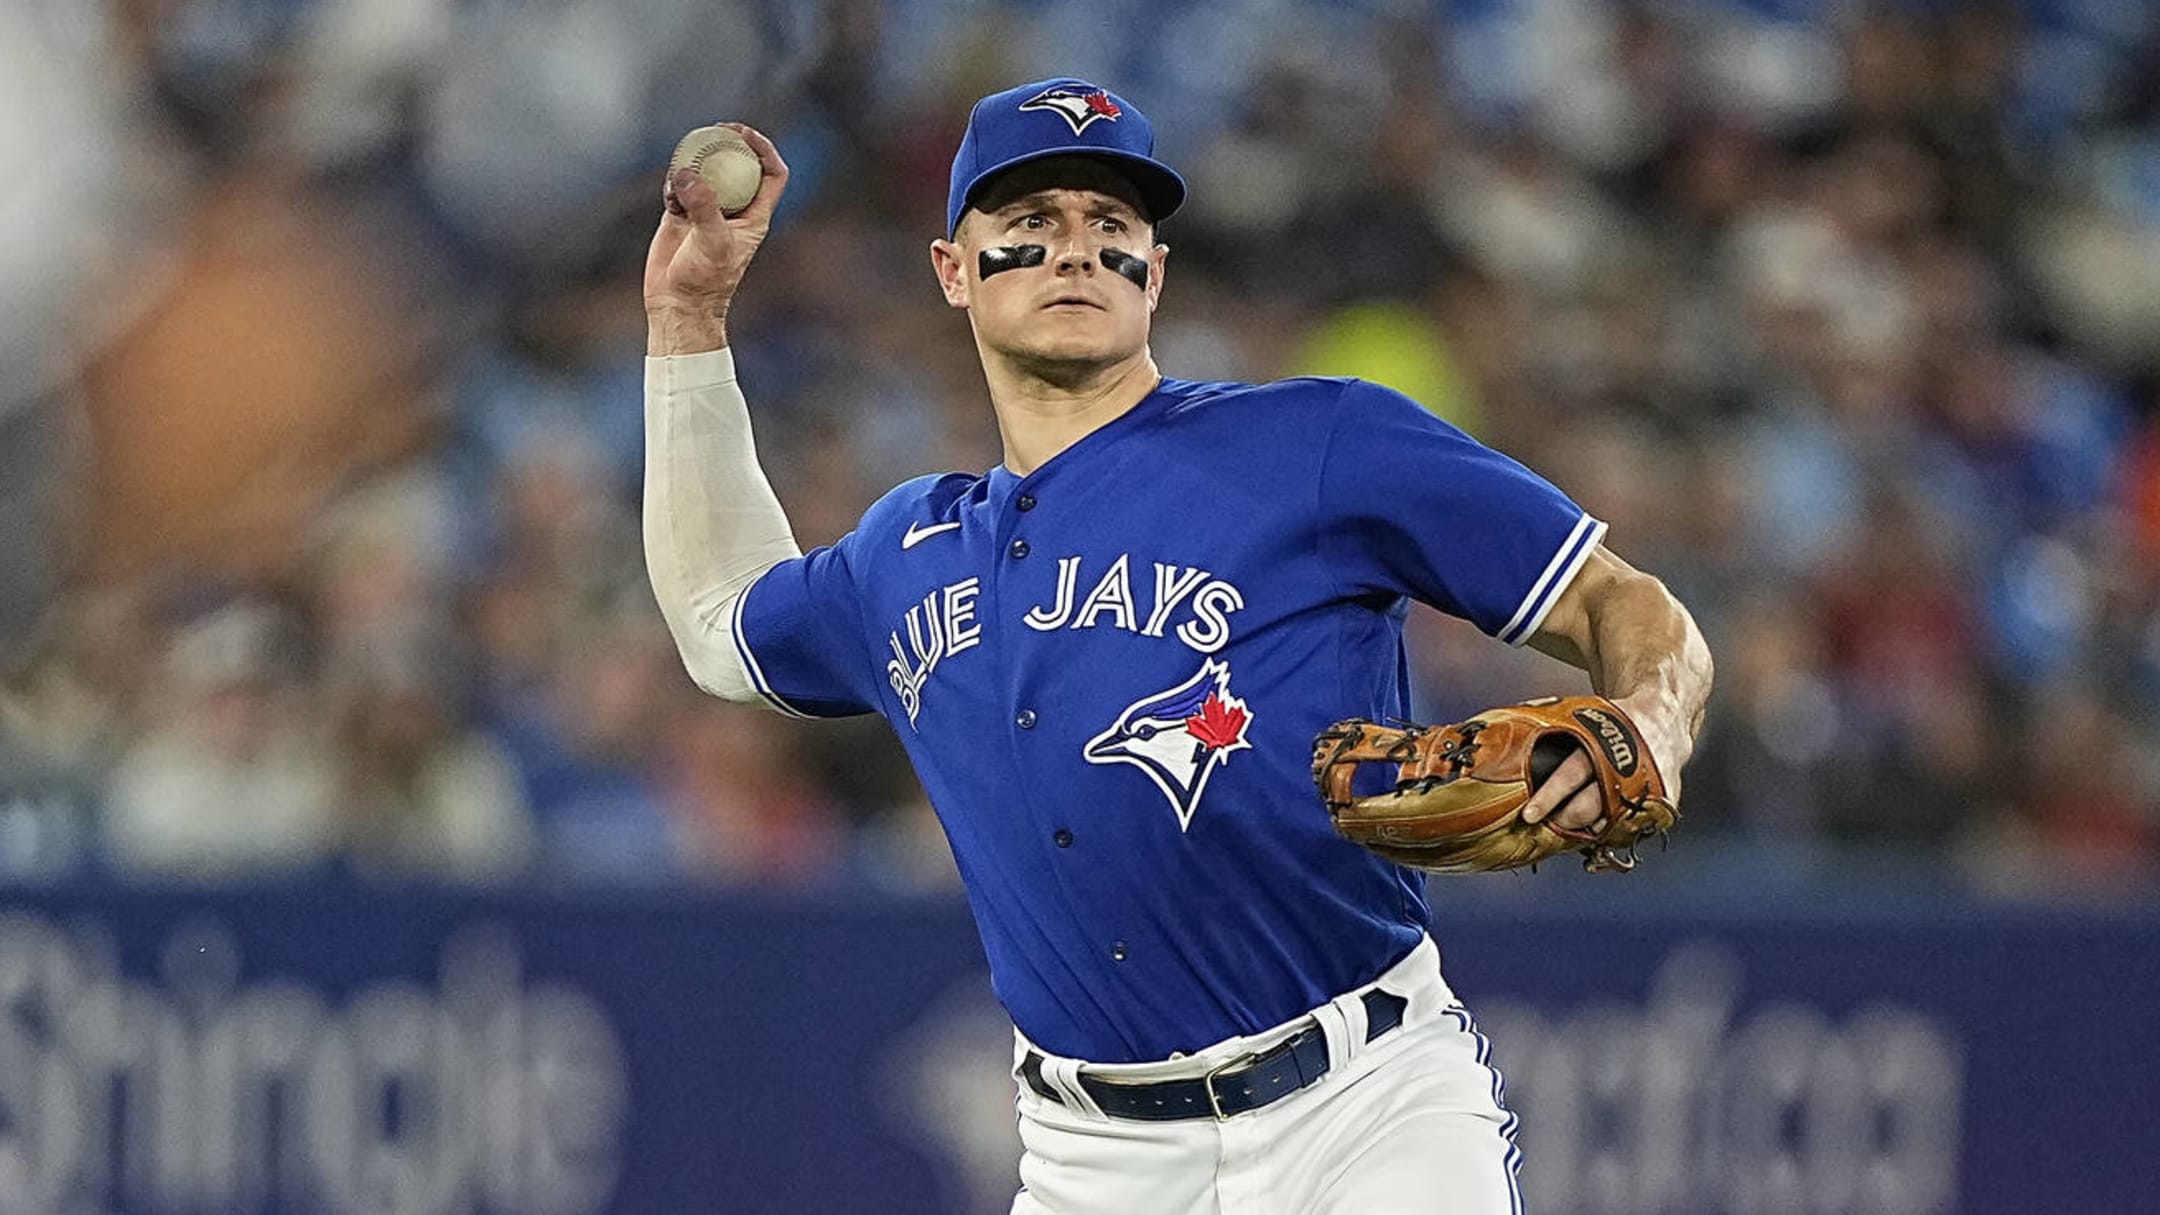 Toronto Blue Jays need to find room for catching prospect Danny Jansen